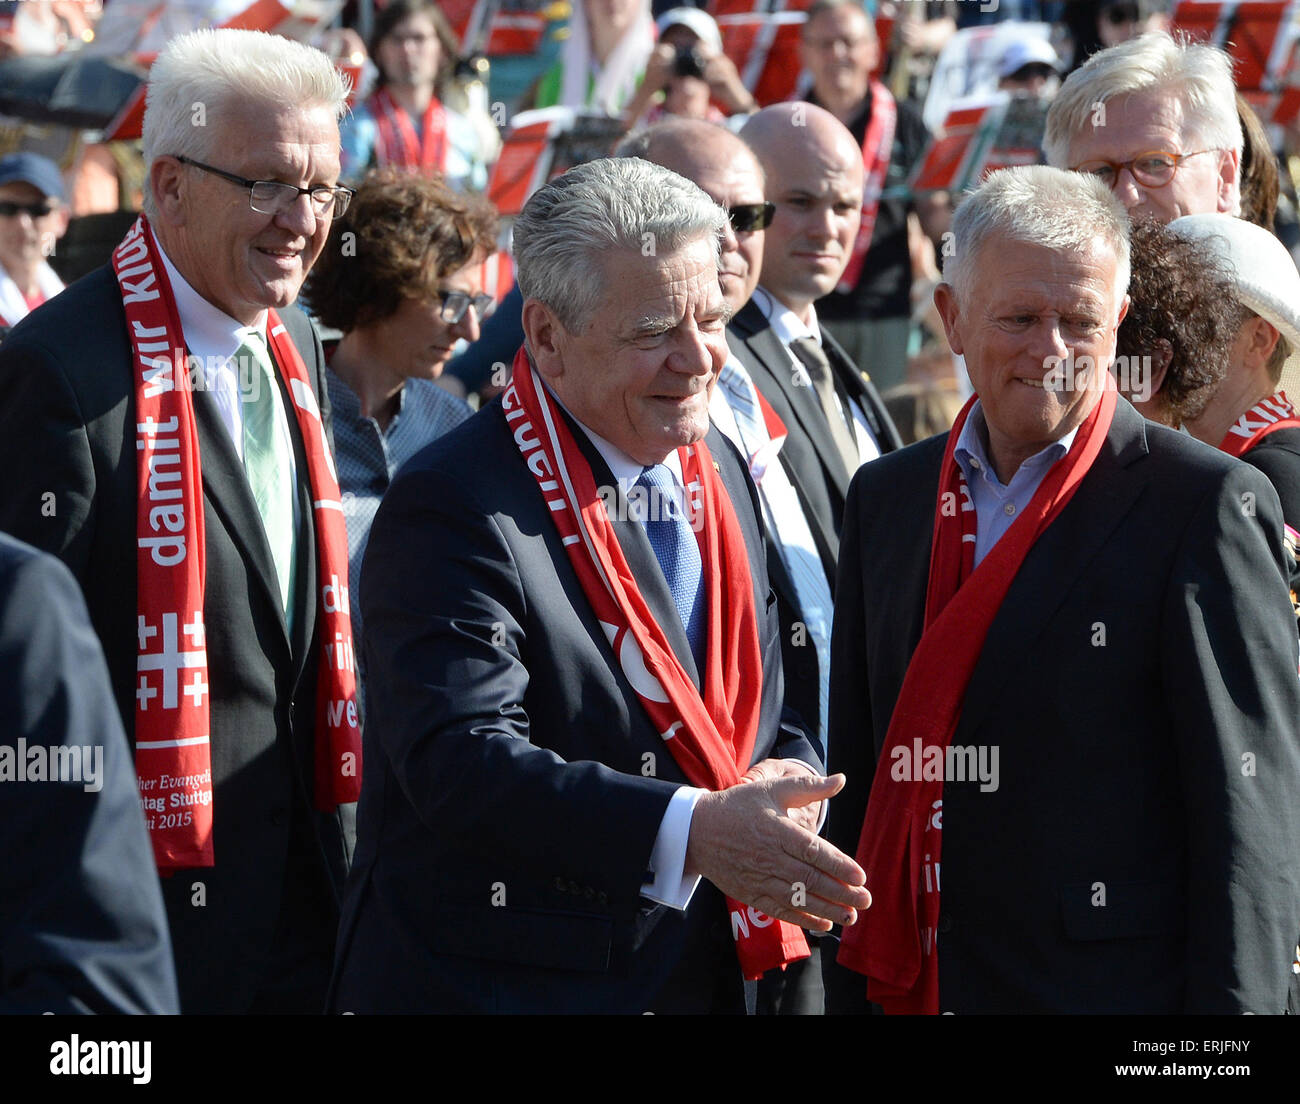 Stuttgart, Germany. 03rd June, 2015. German President Joachim Gauck (C) greets Church Congress attendees at the opening worship service at the 2015 German Evangelical Church Congress in Stuttgart, Germany, 03 June 2015. Minister President of Baden-Wuerttemberg Winfried Kretschmann stands to the left and mayor of Stuttgart Fritz Kuhn stands to the right. Photo: BERND WEISSBROD/dpa/Alamy Live News Stock Photo